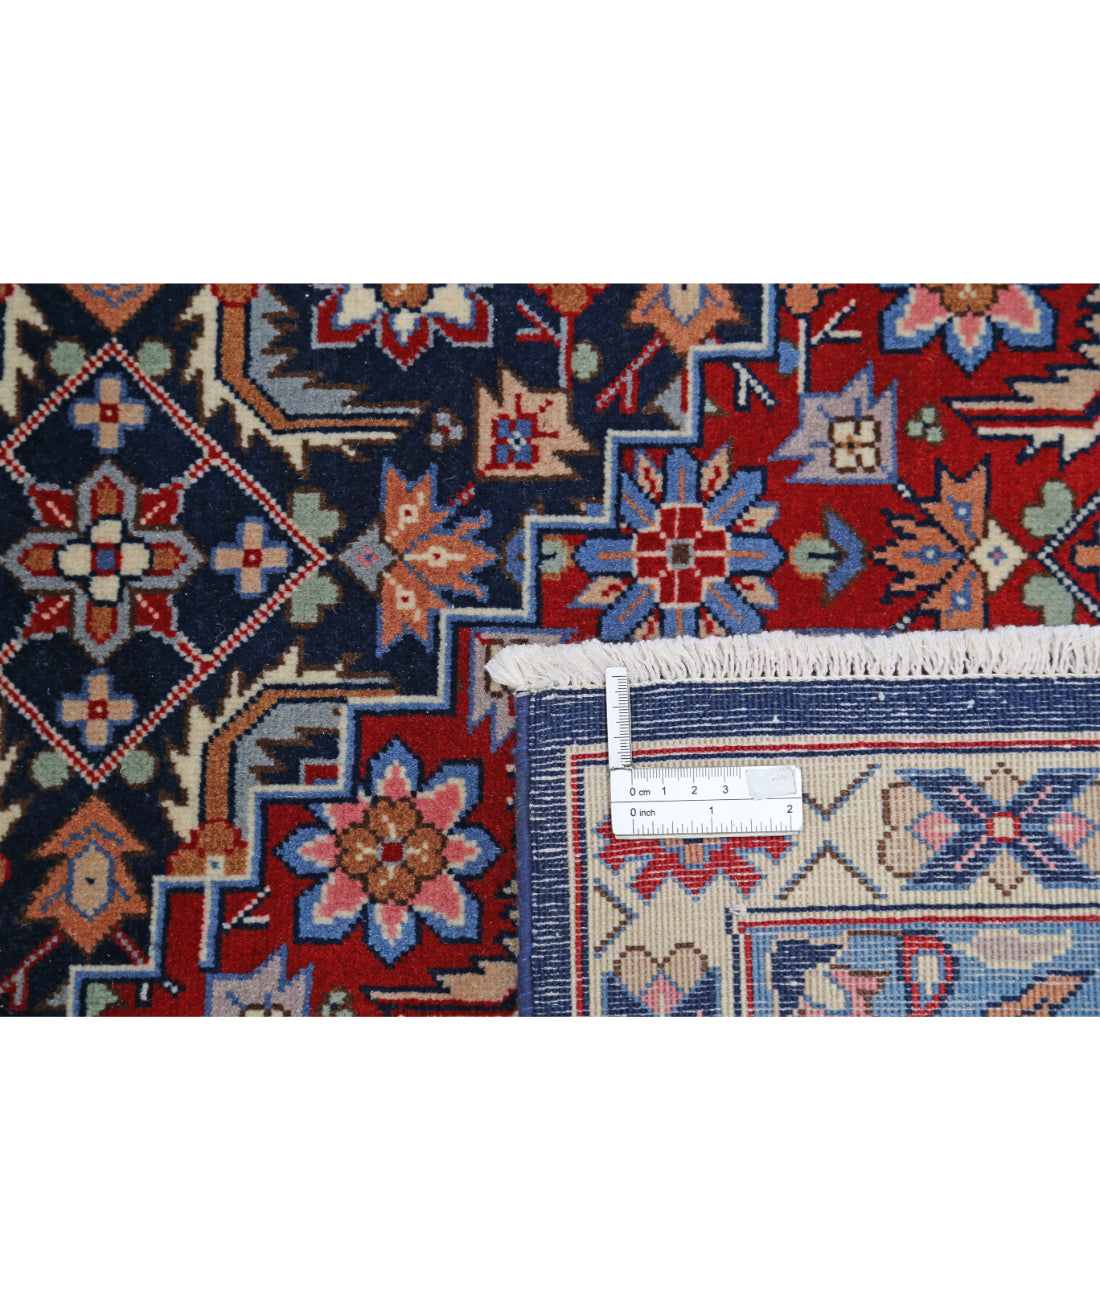 Heritage 8' 0" X 9' 10" Hand-Knotted Wool Rug 8' 0" X 9' 10" (244 X 300) / Blue / Red